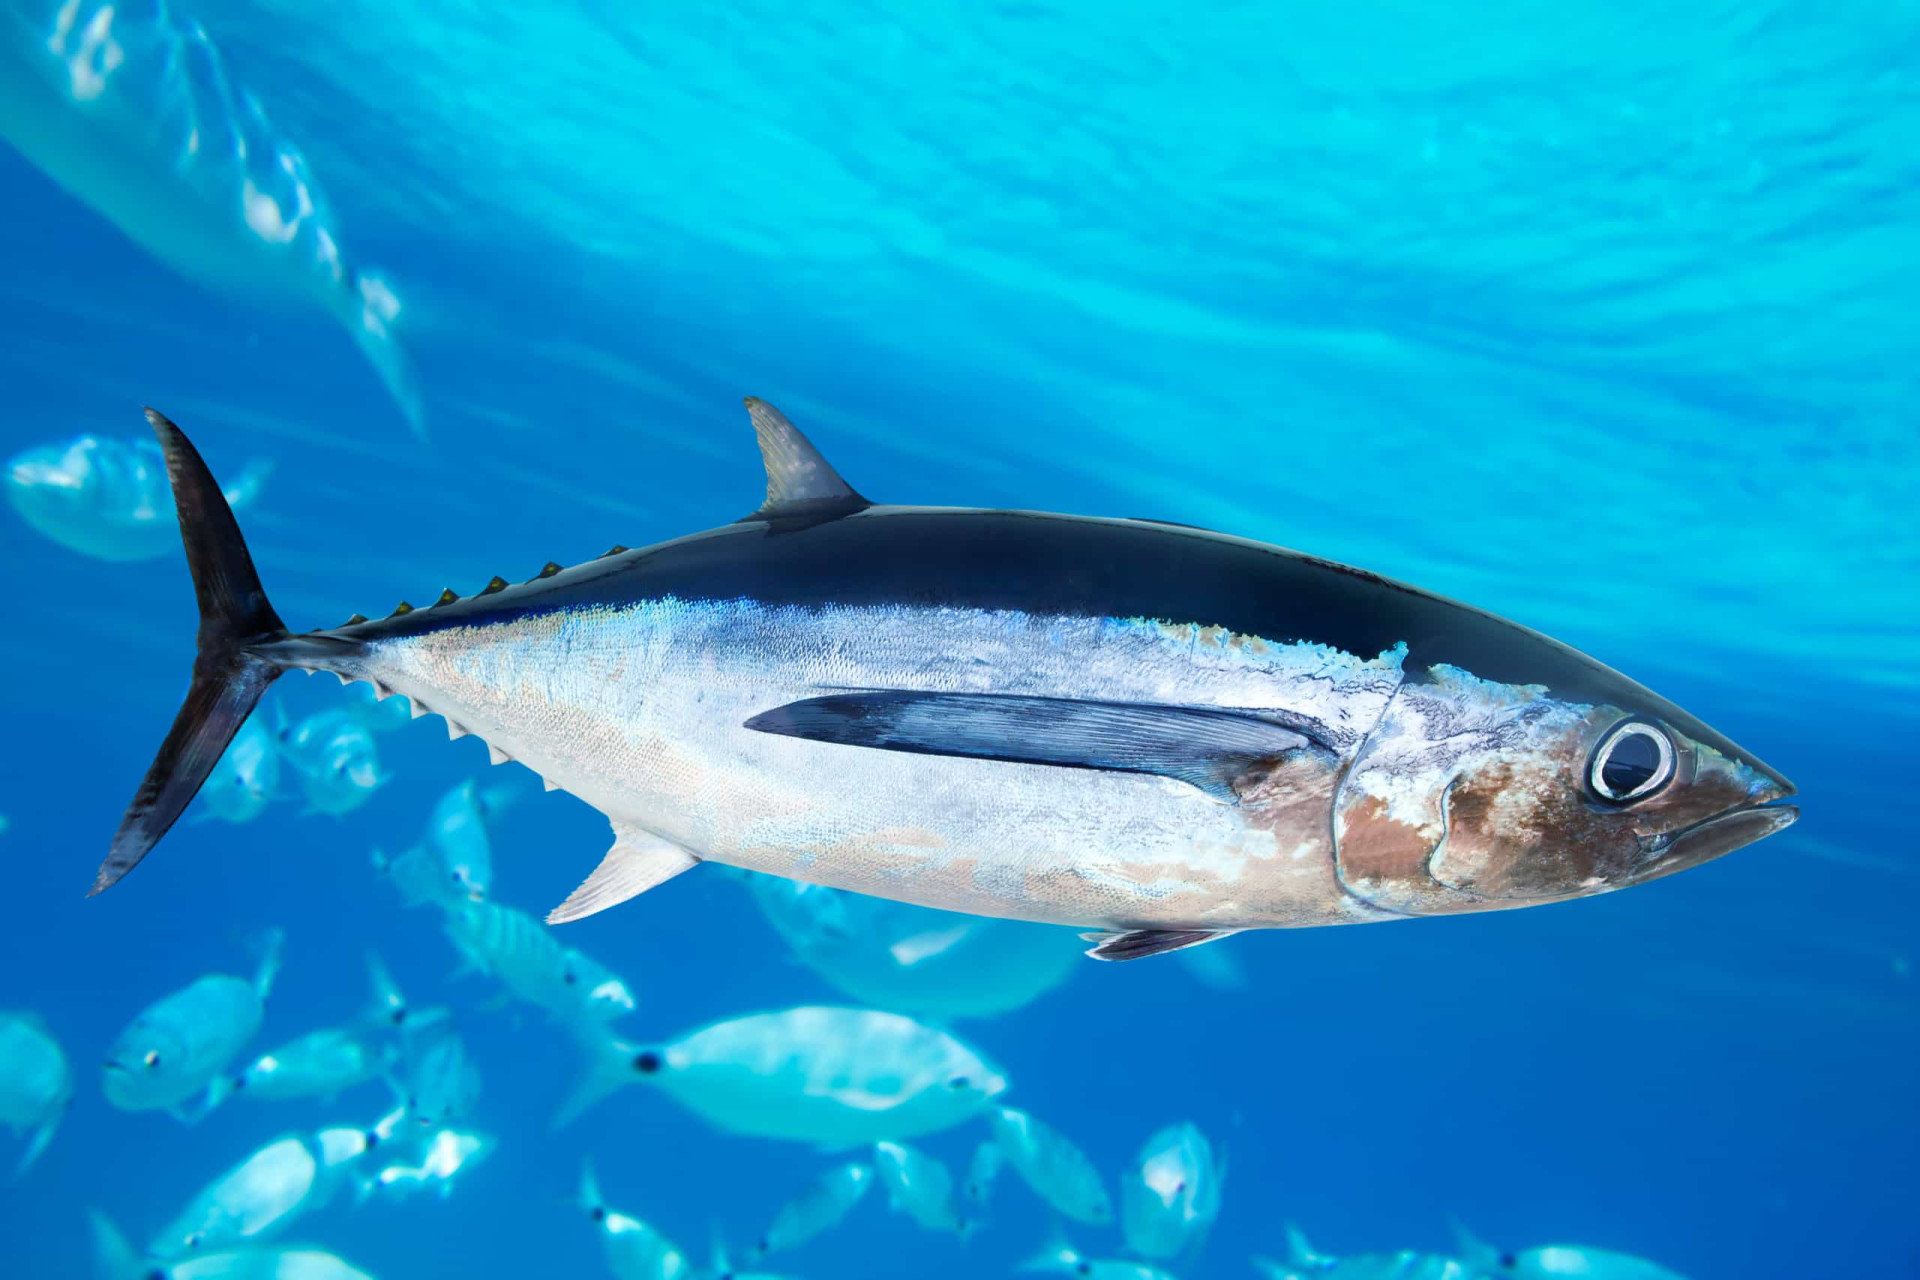 <p>Albacore tuna, a smaller species, are always in motion and have a bullet-like shape. They can be found in the Atlantic, Pacific, and Indian oceans, as well as the Mediterranean Sea.</p><p><a href="https://www.msn.com/en-us/community/channel/vid-7xx8mnucu55yw63we9va2gwr7uihbxwc68fxqp25x6tg4ftibpra?cvid=94631541bc0f4f89bfd59158d696ad7e">Follow us and access great exclusive content every day</a></p>